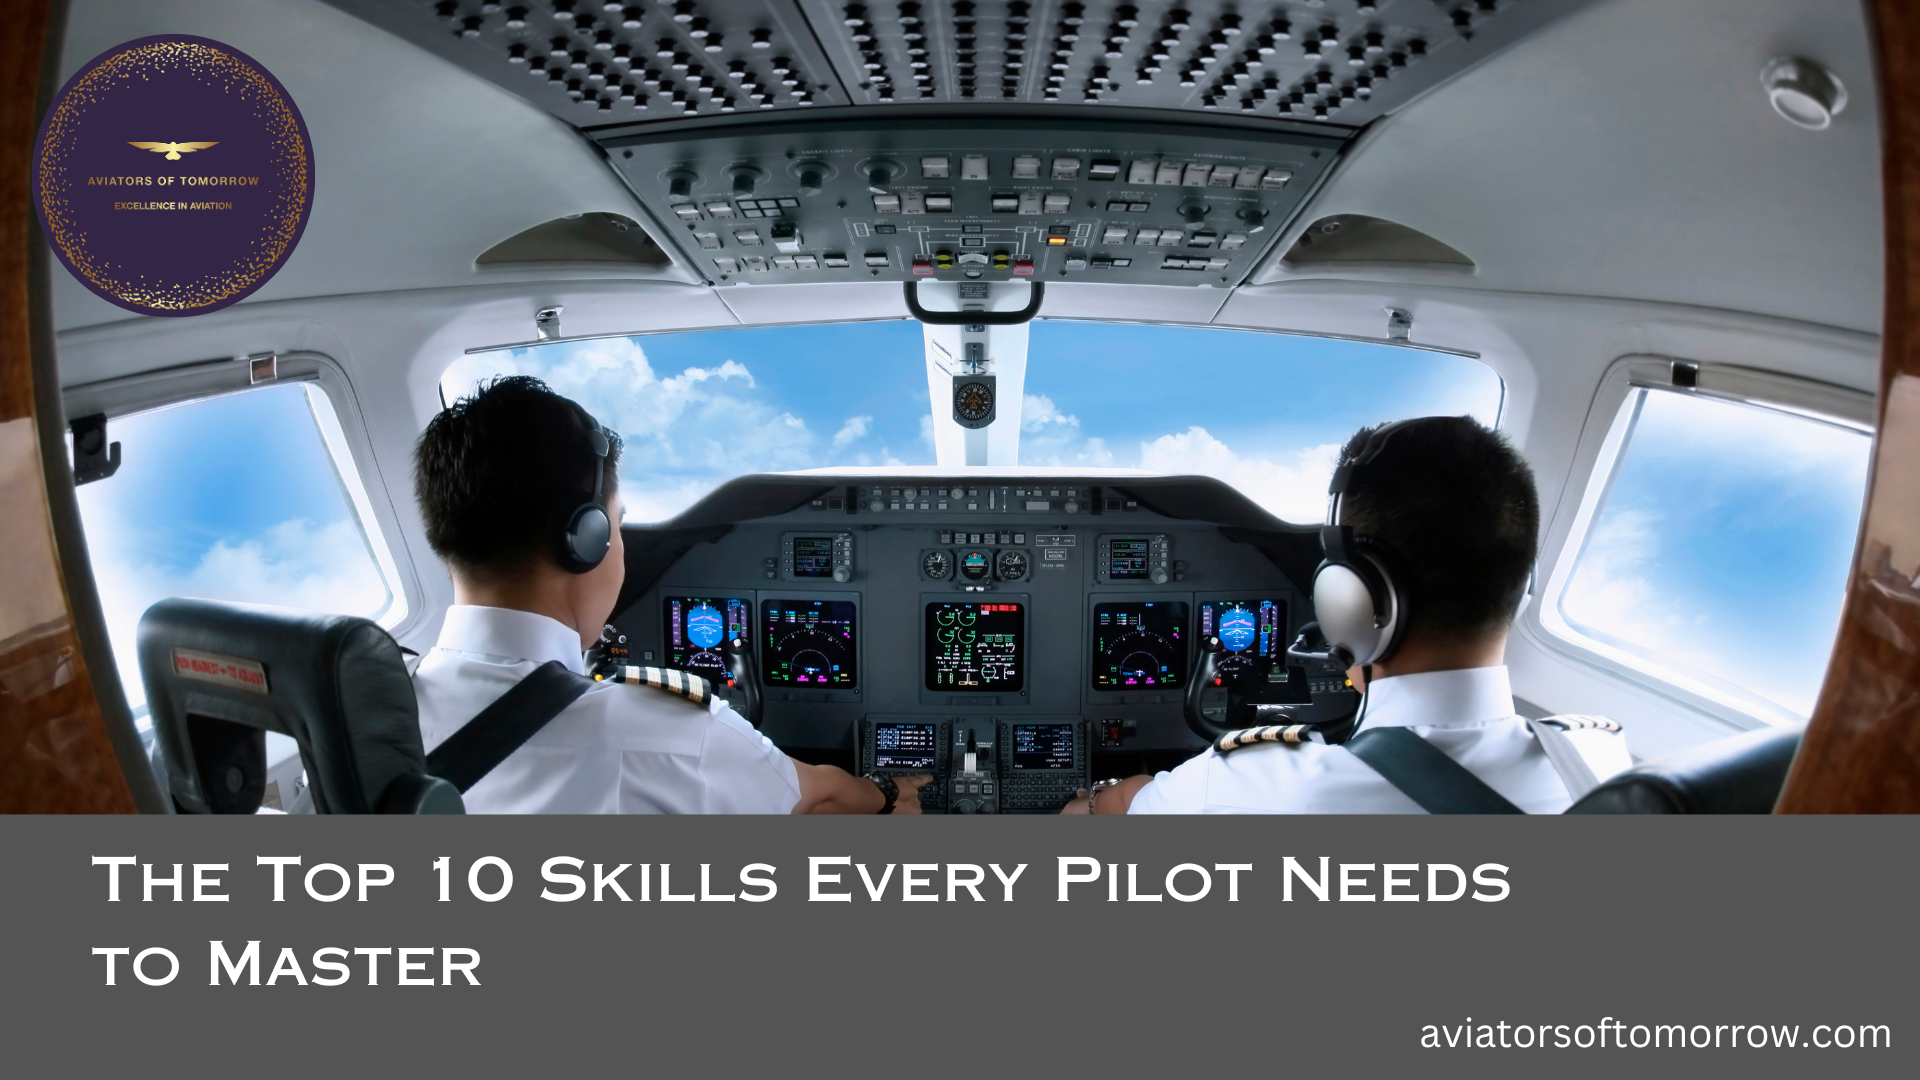 The Top 10 Skills Every Pilot Needs to Master